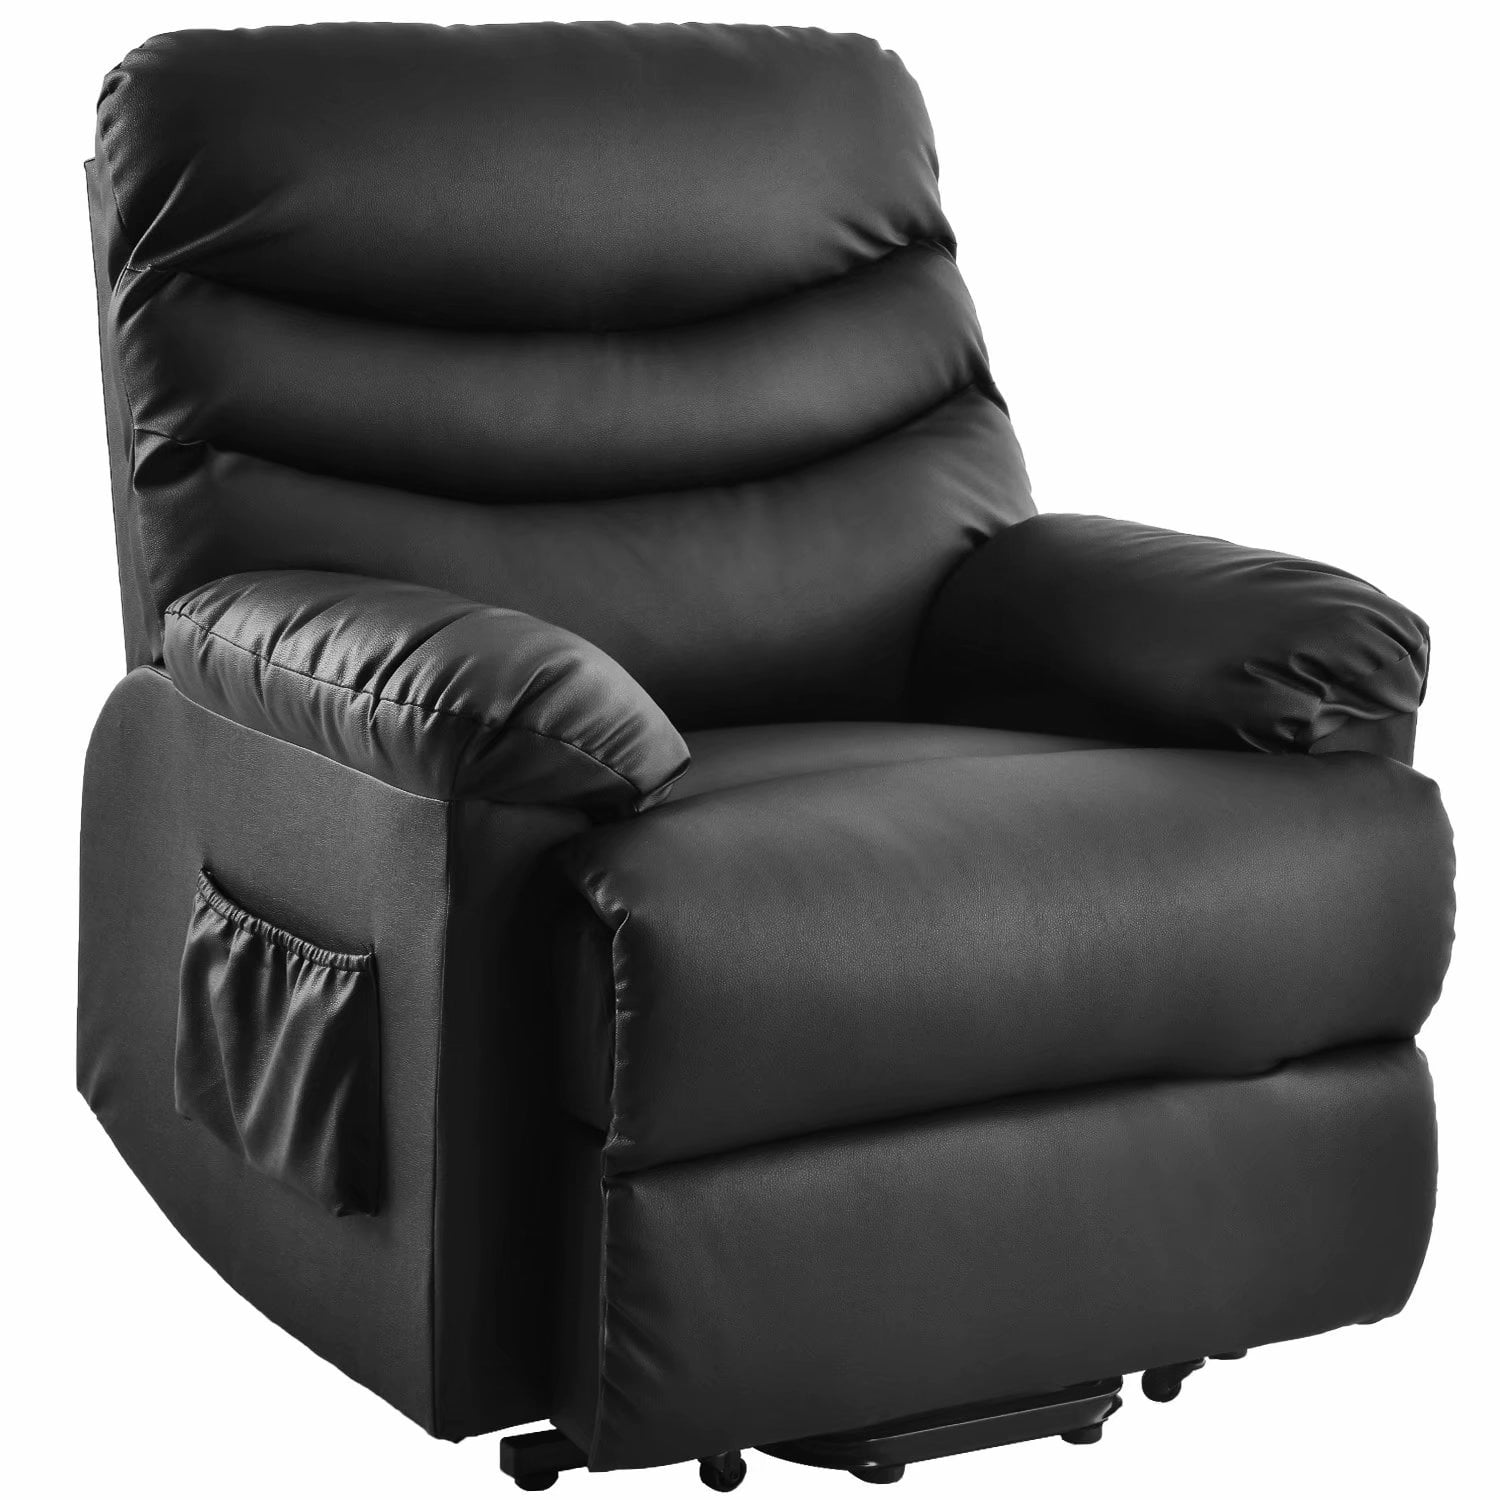 oris fur power recliner and lift chair in black pu leather lift recliner  chair heavy duty steel reclining mechanism（not available on walmart